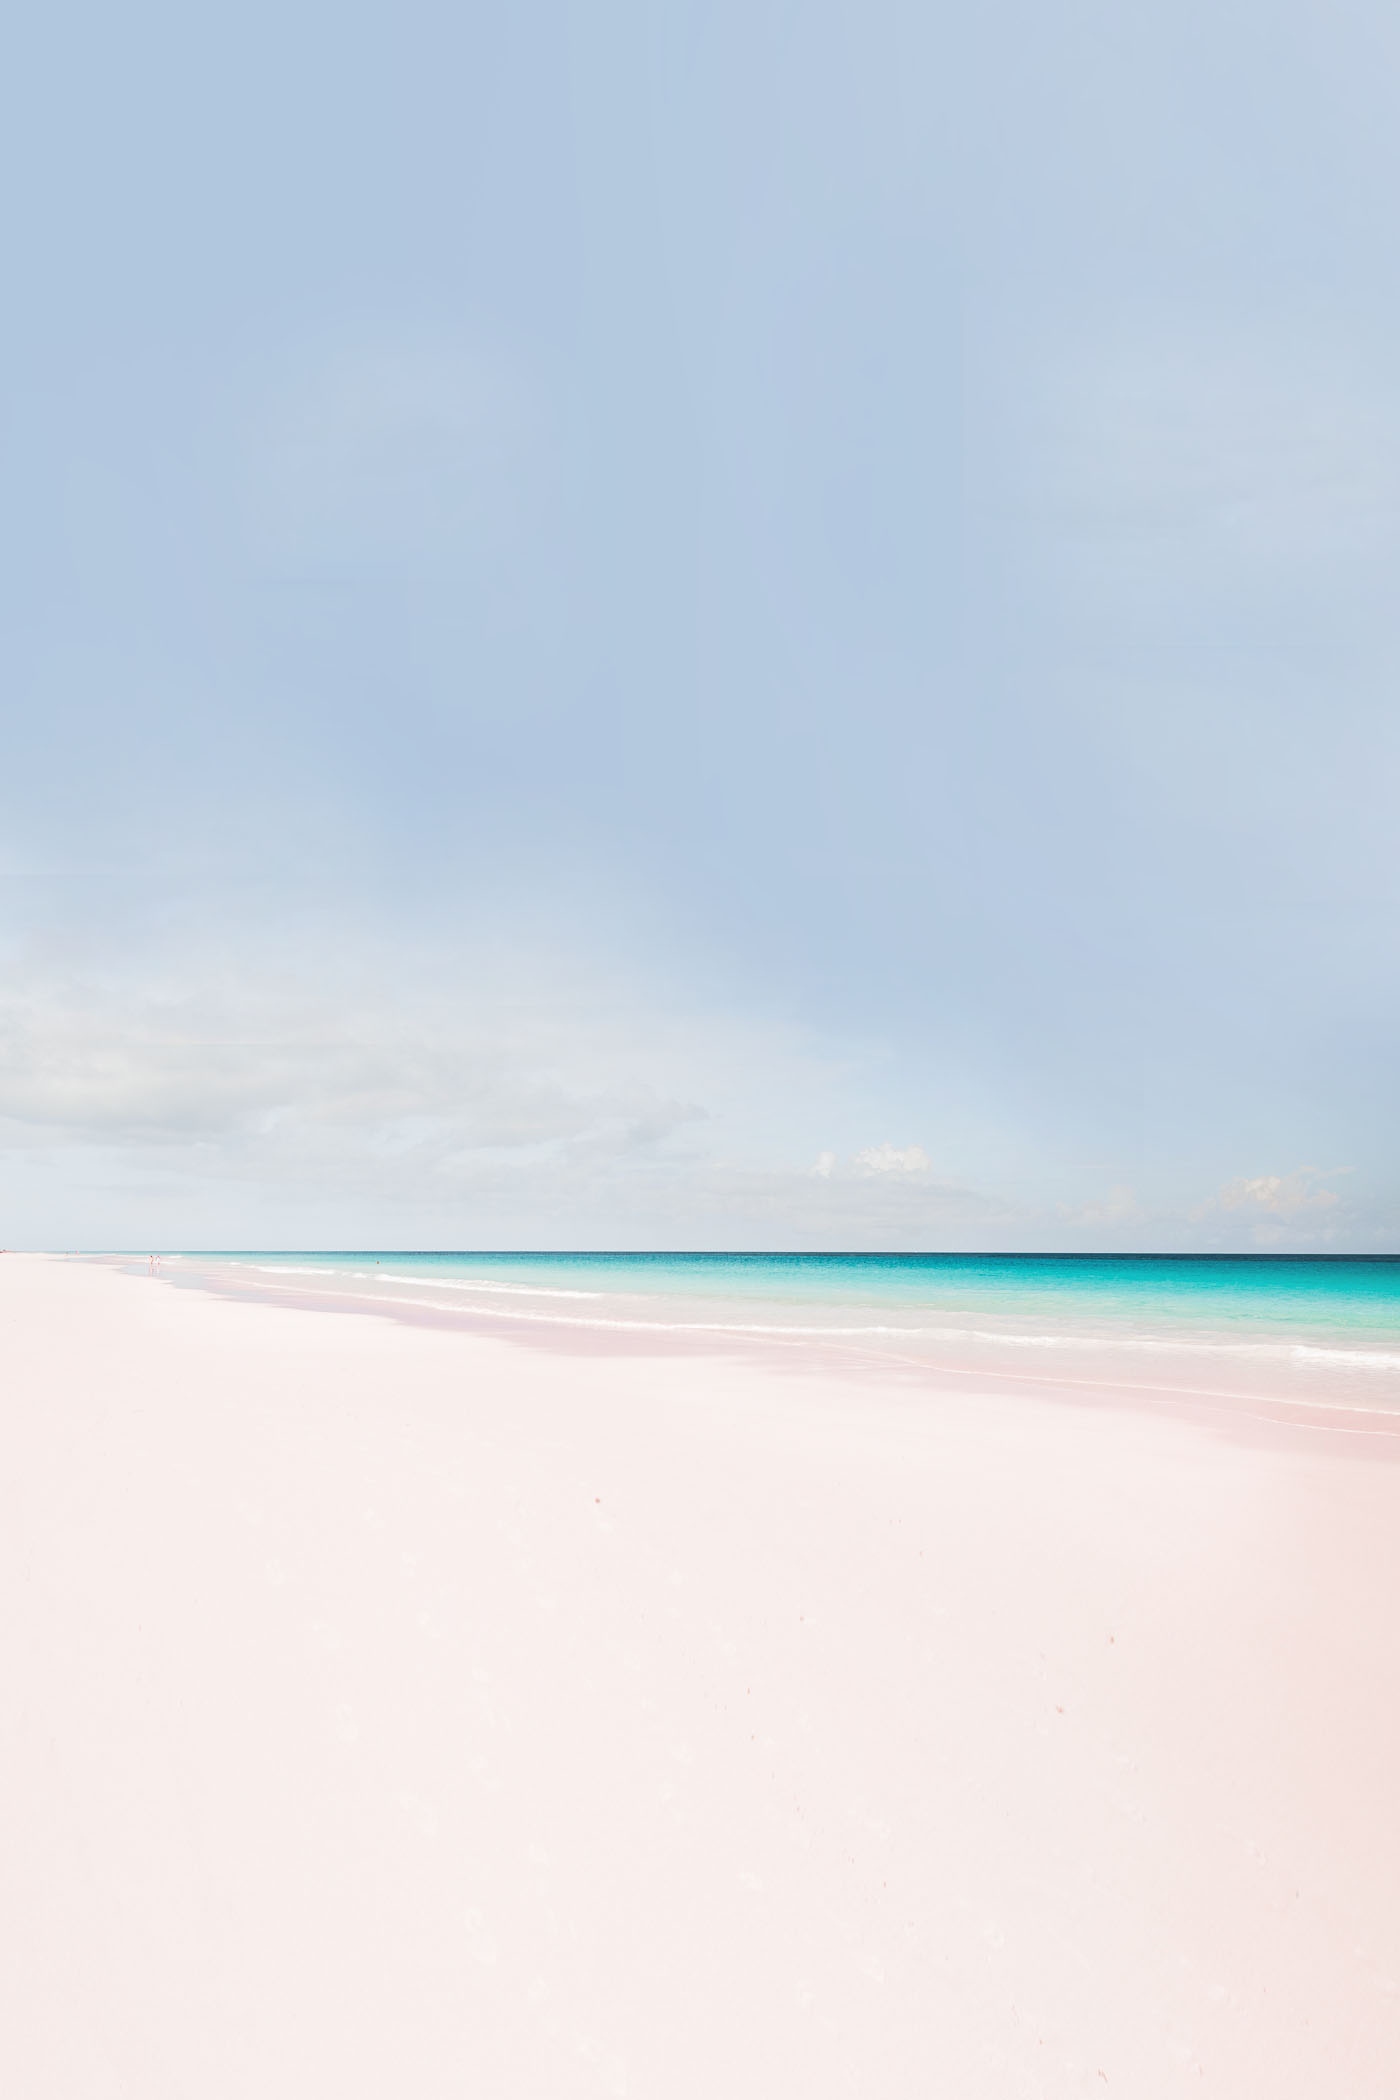 Pink Sand Beach, in the Bahamas